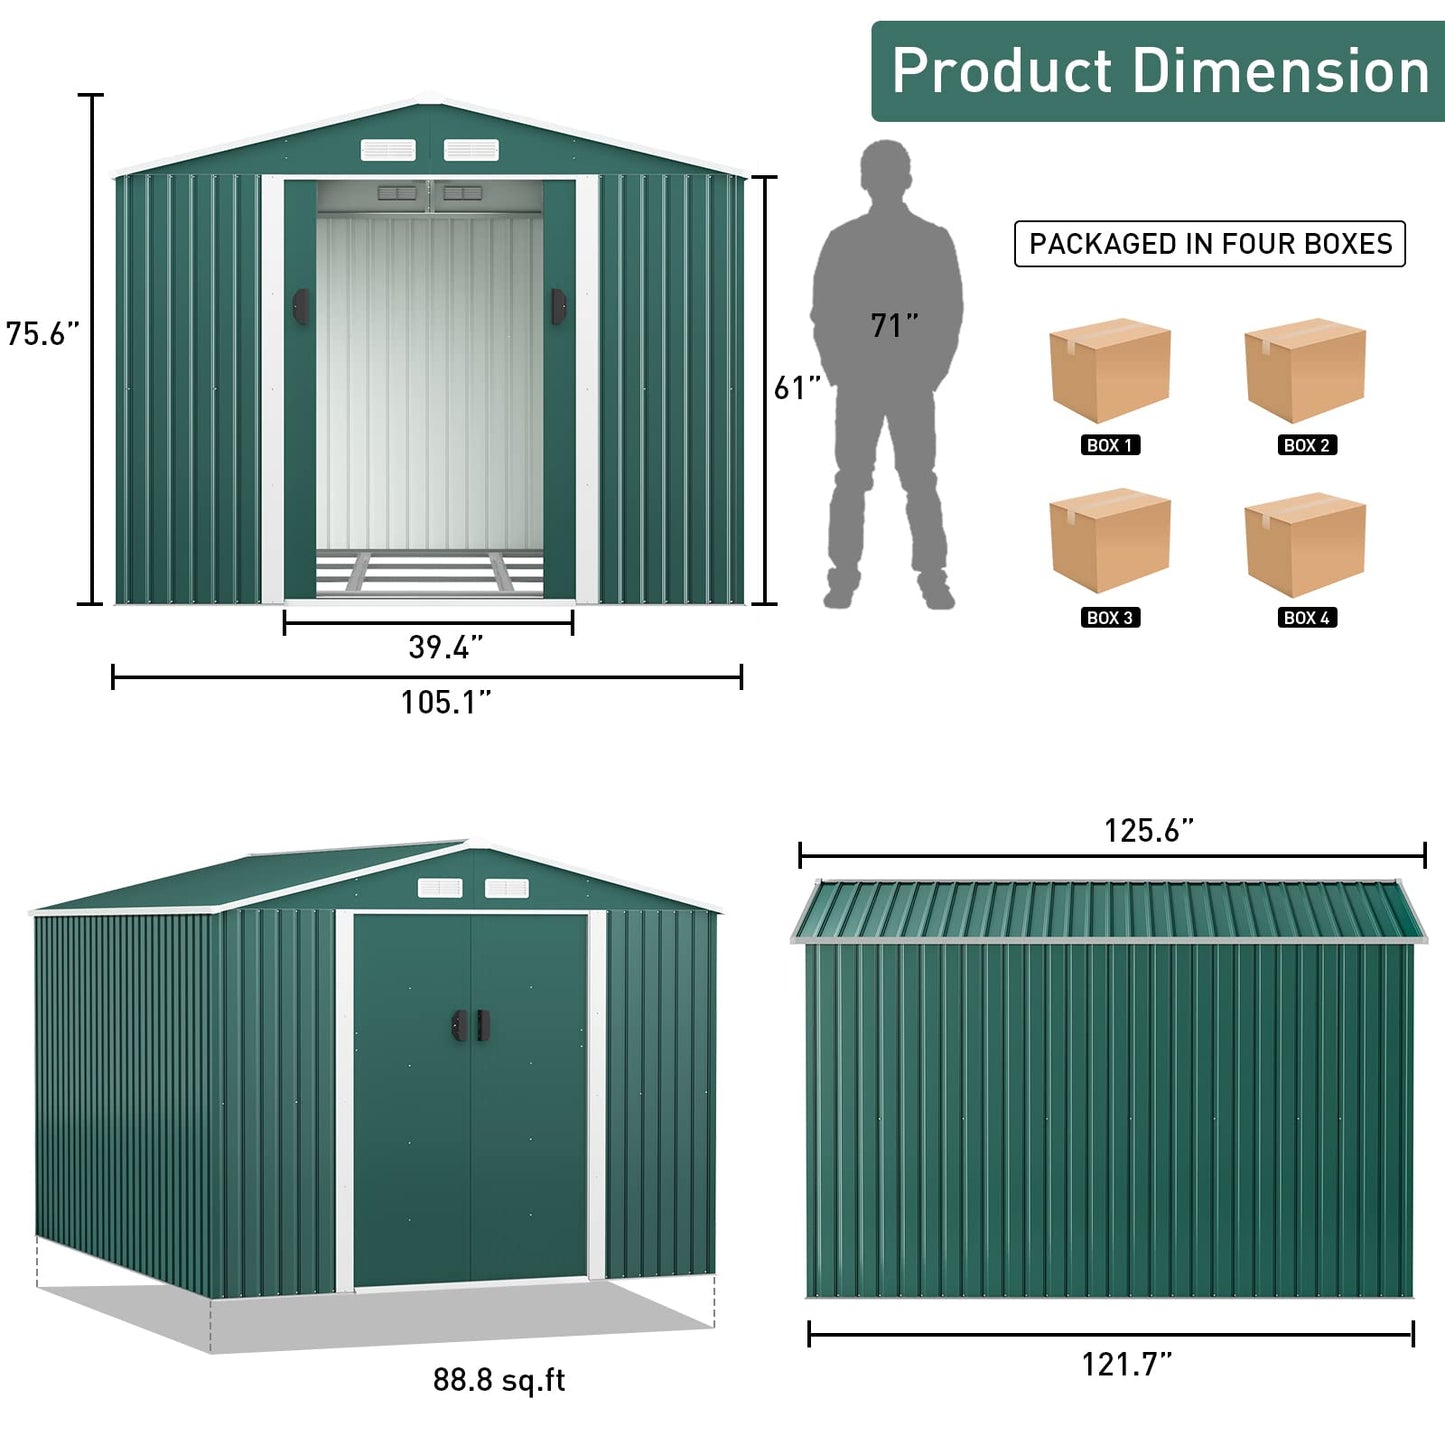 HOGYME 10.5' x 9.1' Storage Shed Large Metal Shed, Sheds &Outdoor Storage Clearance Suitable for Garden Tool Bike Lawn Mower Ladder, Utility Tool House w/ Lockable/Sliding Door, 4 Vents, Green